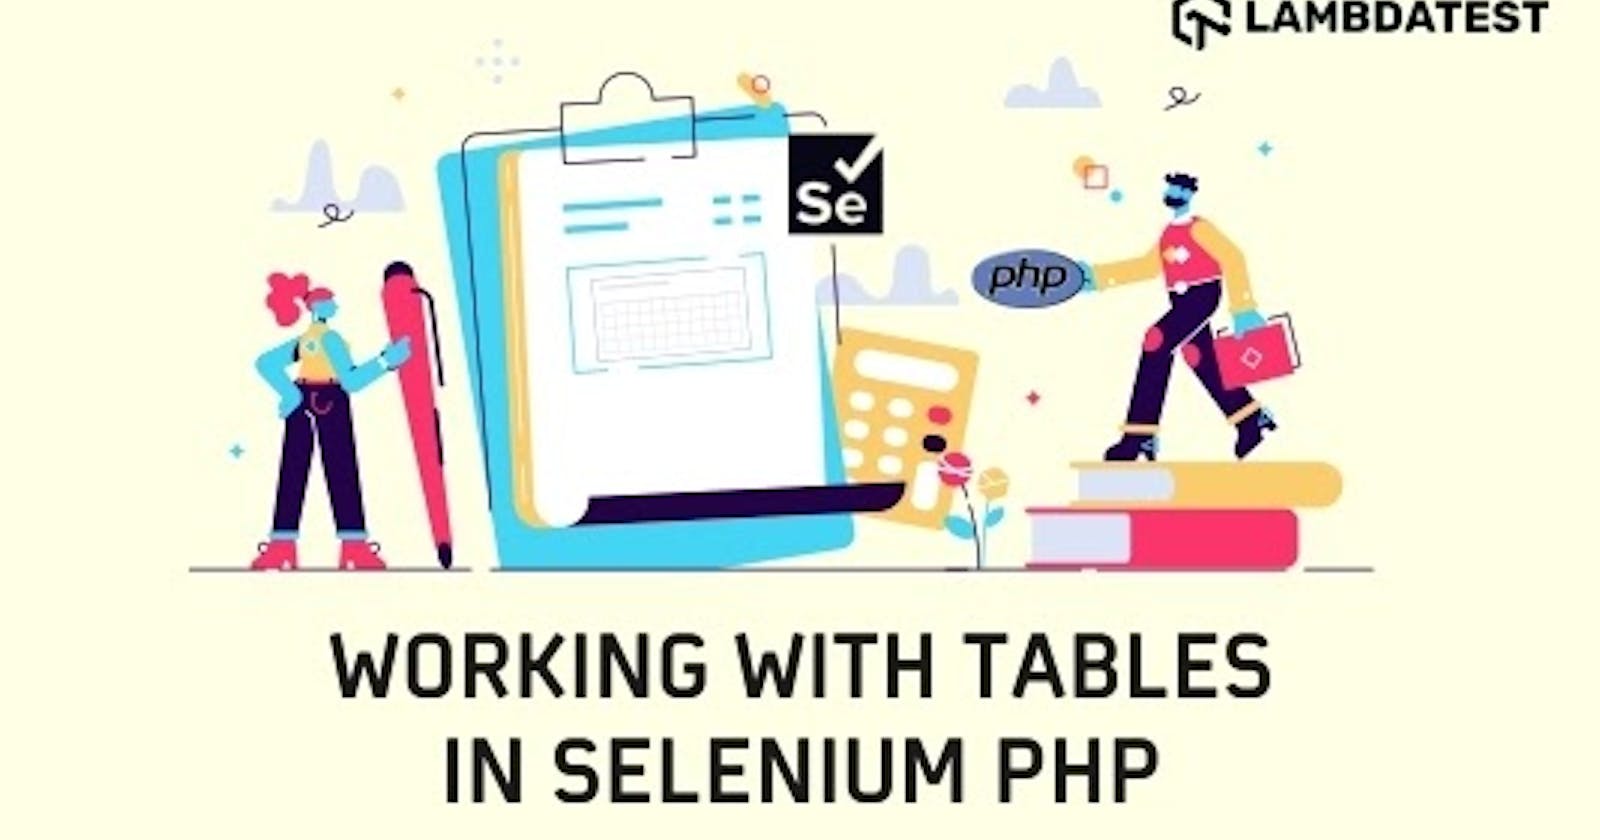 How To Work With Tables In Selenium PHP?